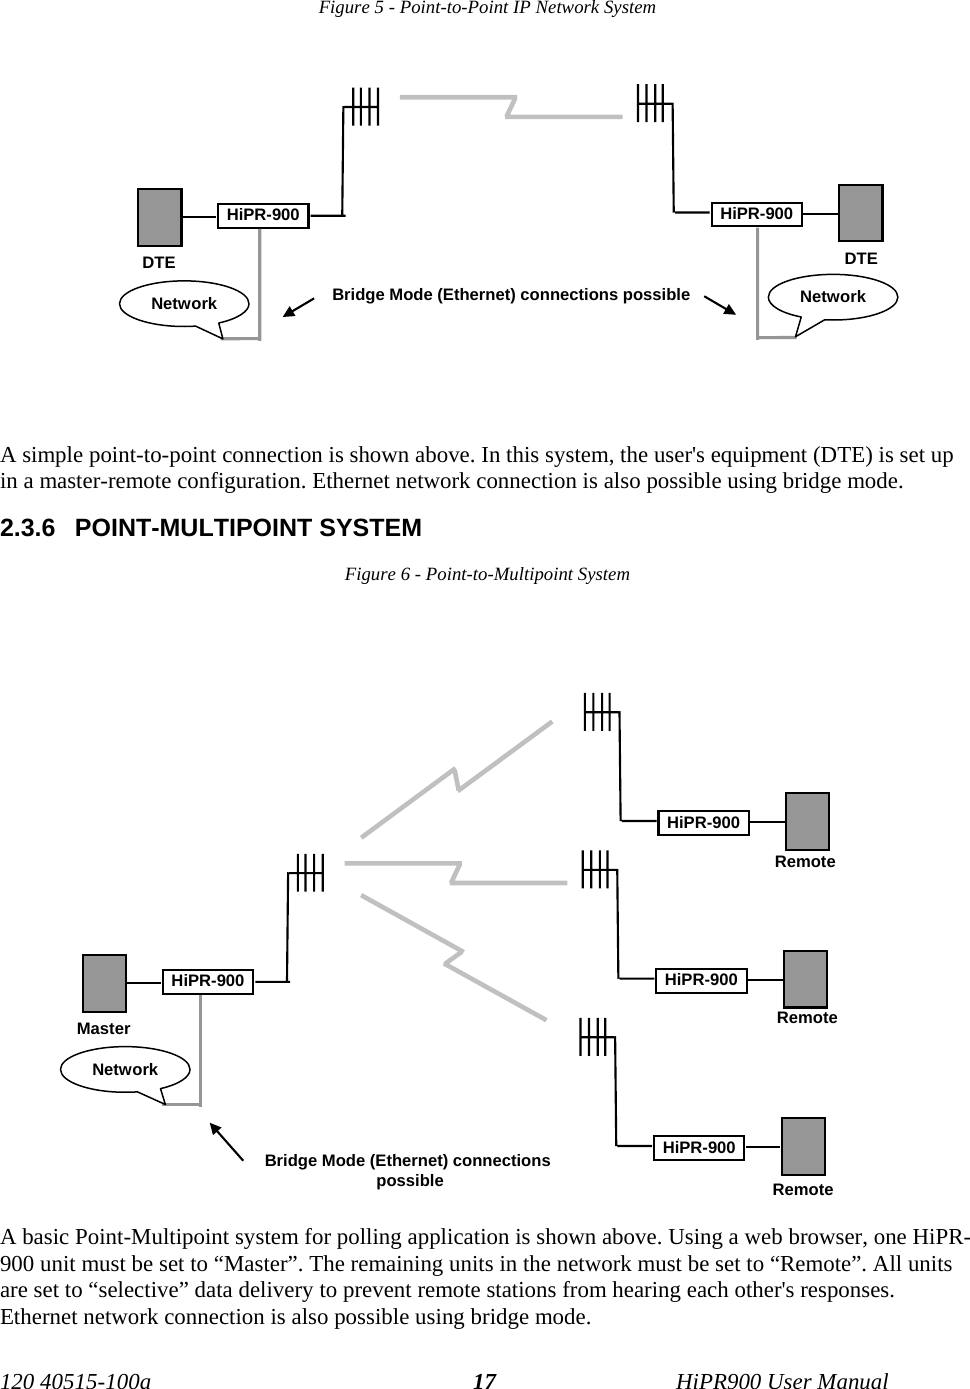  Figure 5 - Point-to-Point IP Network System  HiPR-900  HiPR-900 DTE  DTE Bridge Mode (Ethernet) connections possible  Network Network A simple point-to-point connection is shown above. In this system, the user&apos;s equipment (DTE) is set up in a master-remote configuration. Ethernet network connection is also possible using bridge mode. 2.3.6 POINT-MULTIPOINT SYSTEM Figure 6 - Point-to-Multipoint System   HiPR-900HiPR-900Remote Remote Remote HiPR-900HiPR-900 Master Network Bridge Mode (Ethernet) connections  possible A basic Point-Multipoint system for polling application is shown above. Using a web browser, one HiPR-900 unit must be set to “Master”. The remaining units in the network must be set to “Remote”. All units are set to “selective” data delivery to prevent remote stations from hearing each other&apos;s responses. Ethernet network connection is also possible using bridge mode.  120 40515-100a   HiPR900 User Manual 17